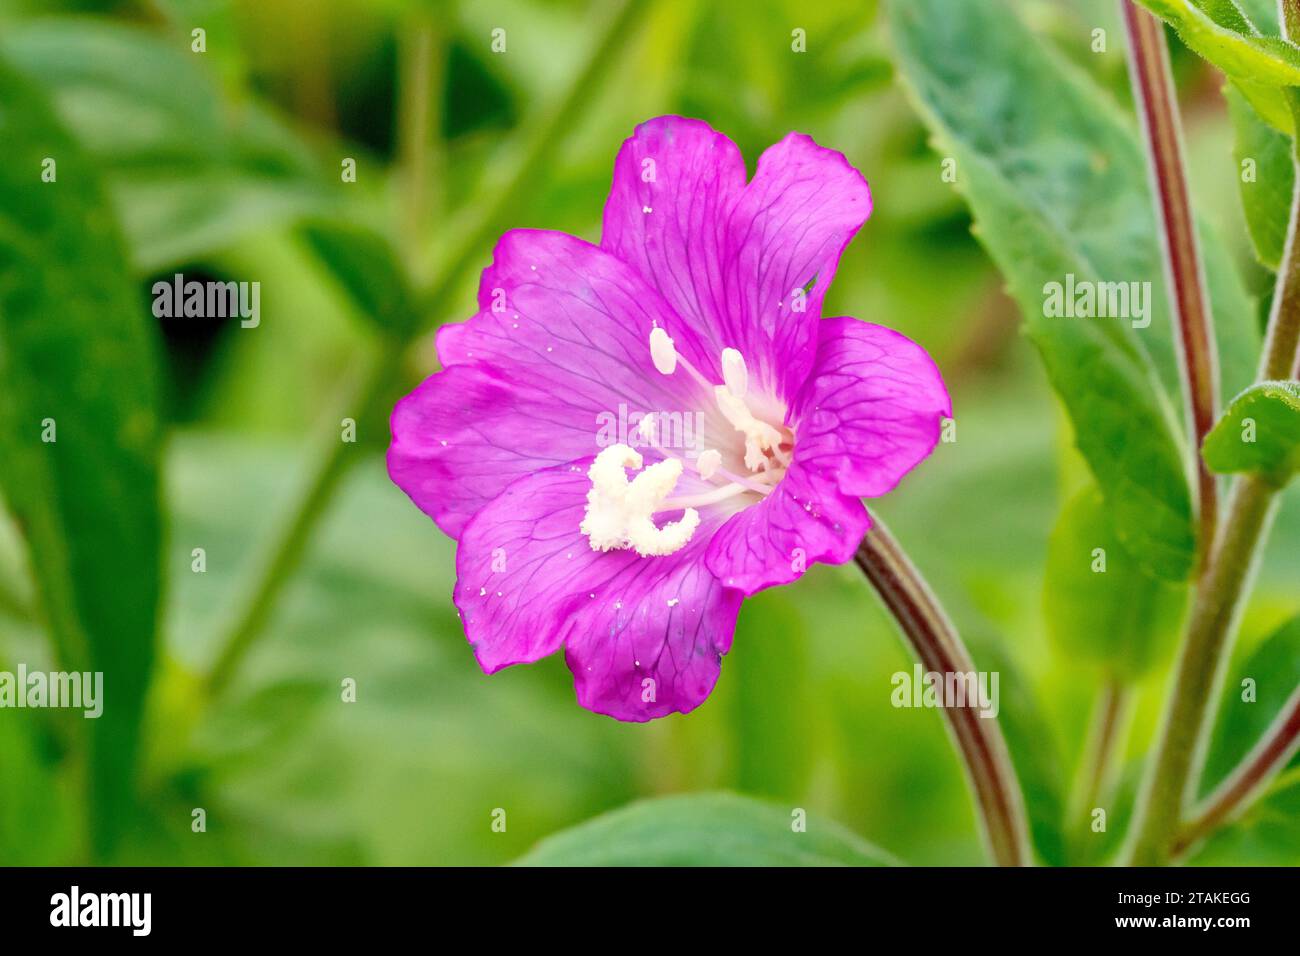 Great Willowherb (epilobium hirsutum), close up of a single pink flower of the plant, isolated from the background. Stock Photo